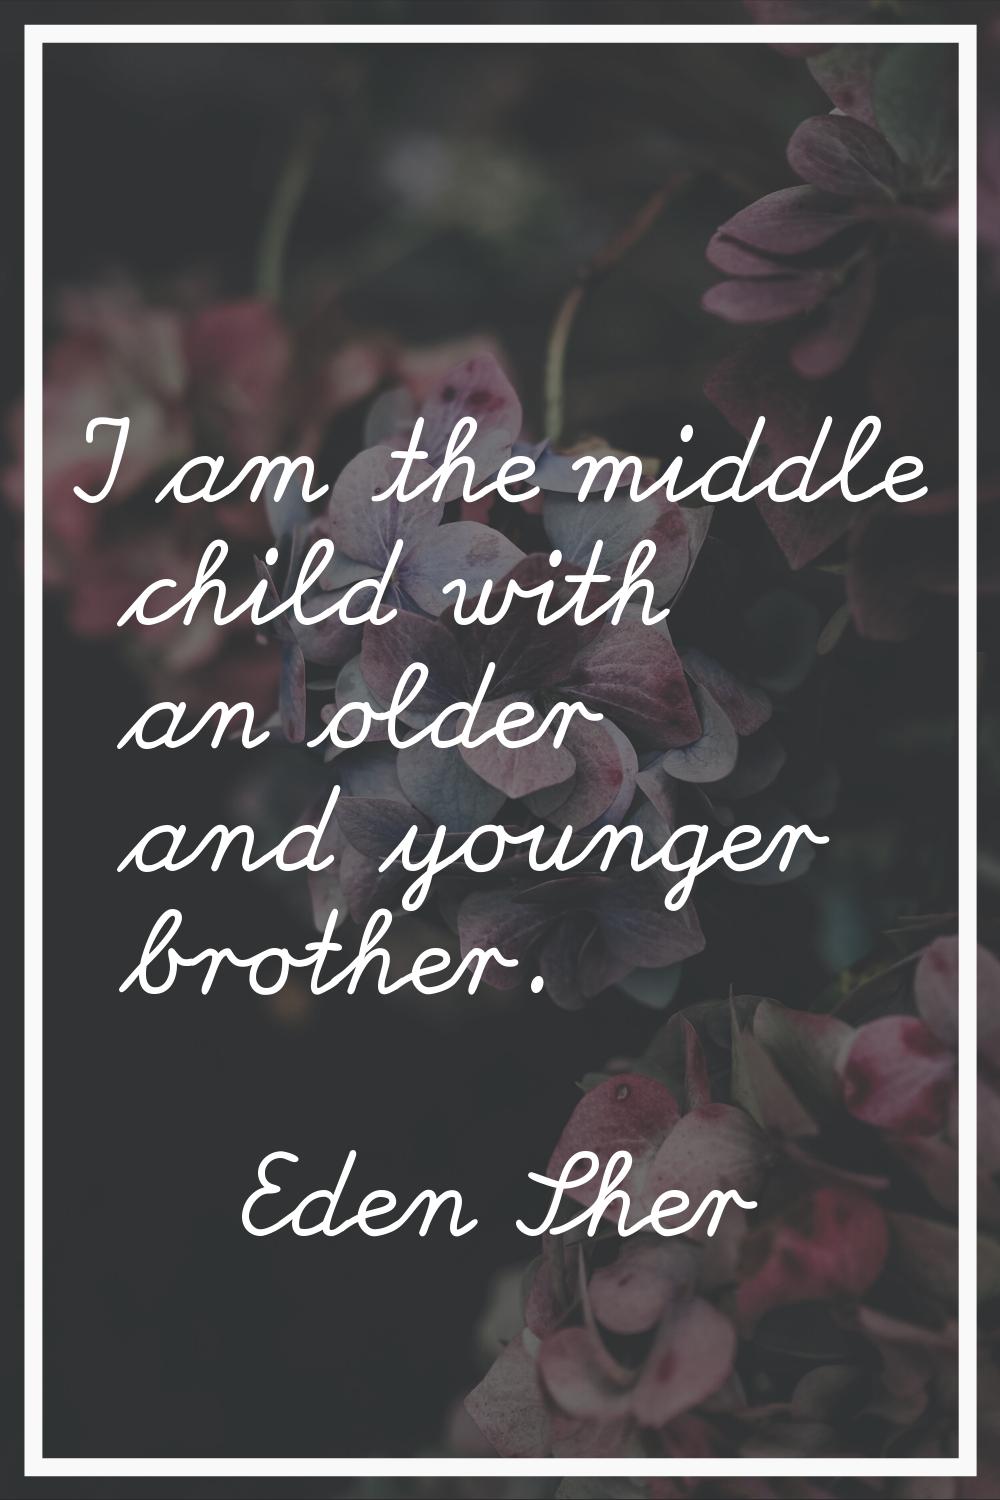 I am the middle child with an older and younger brother.